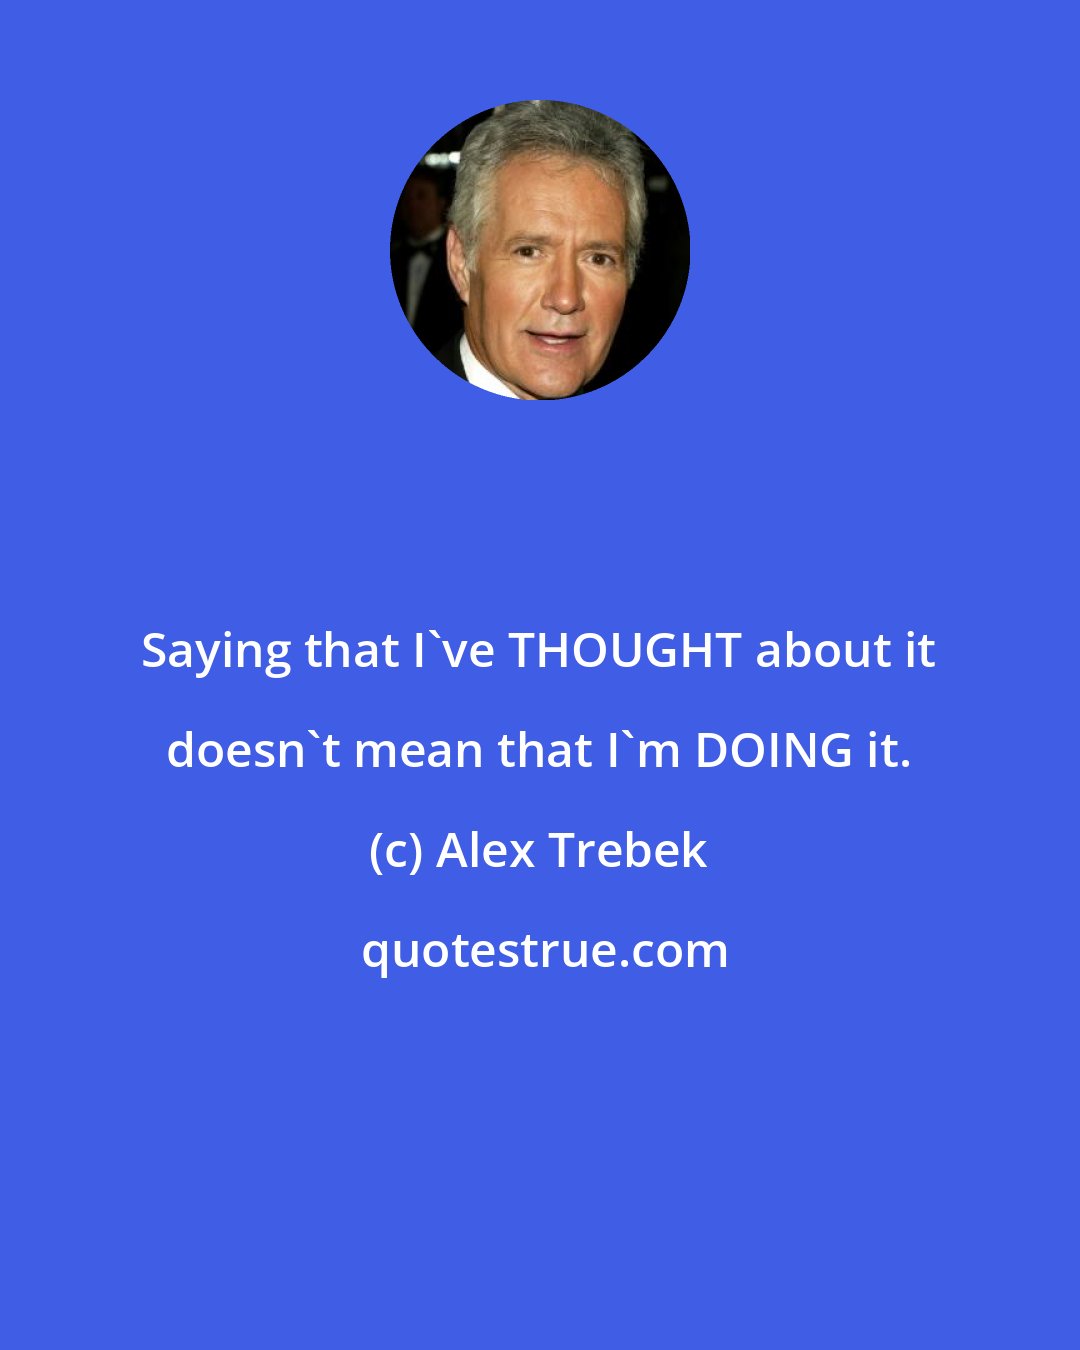 Alex Trebek: Saying that I've THOUGHT about it doesn't mean that I'm DOING it.